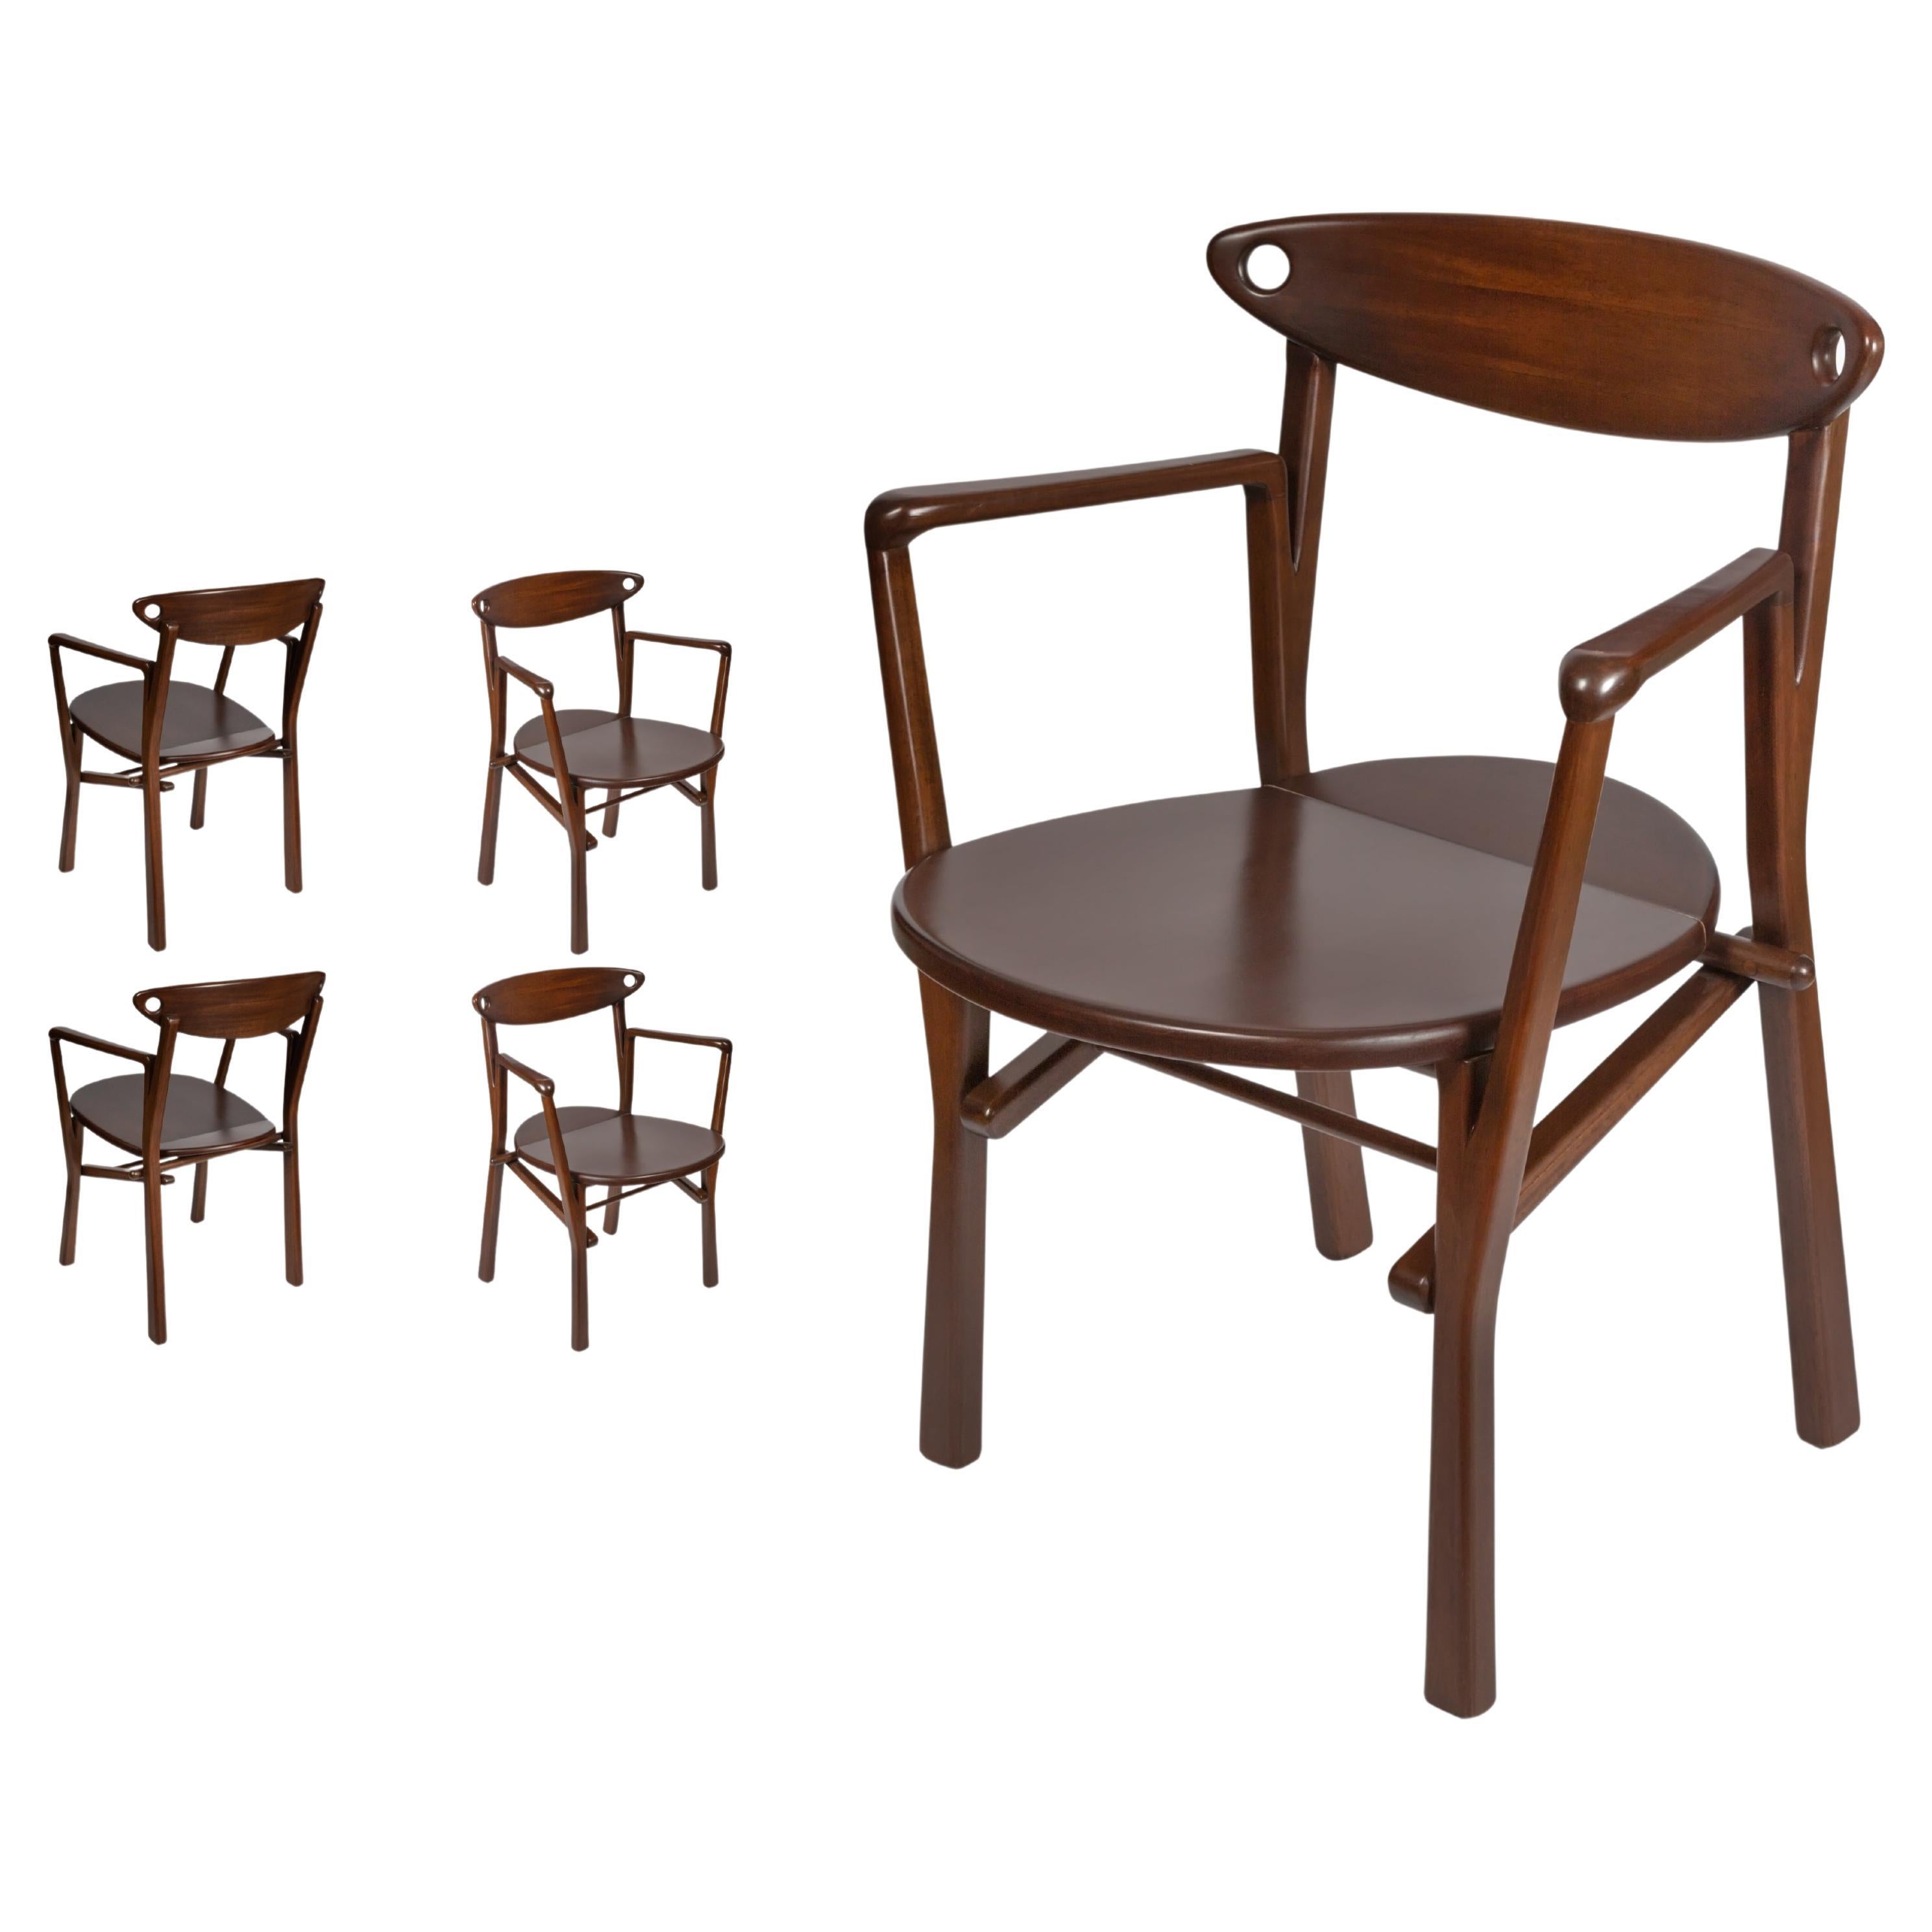 Set of 04 Dinner Chairs Laje in Dark Brown Finish Wood For Sale